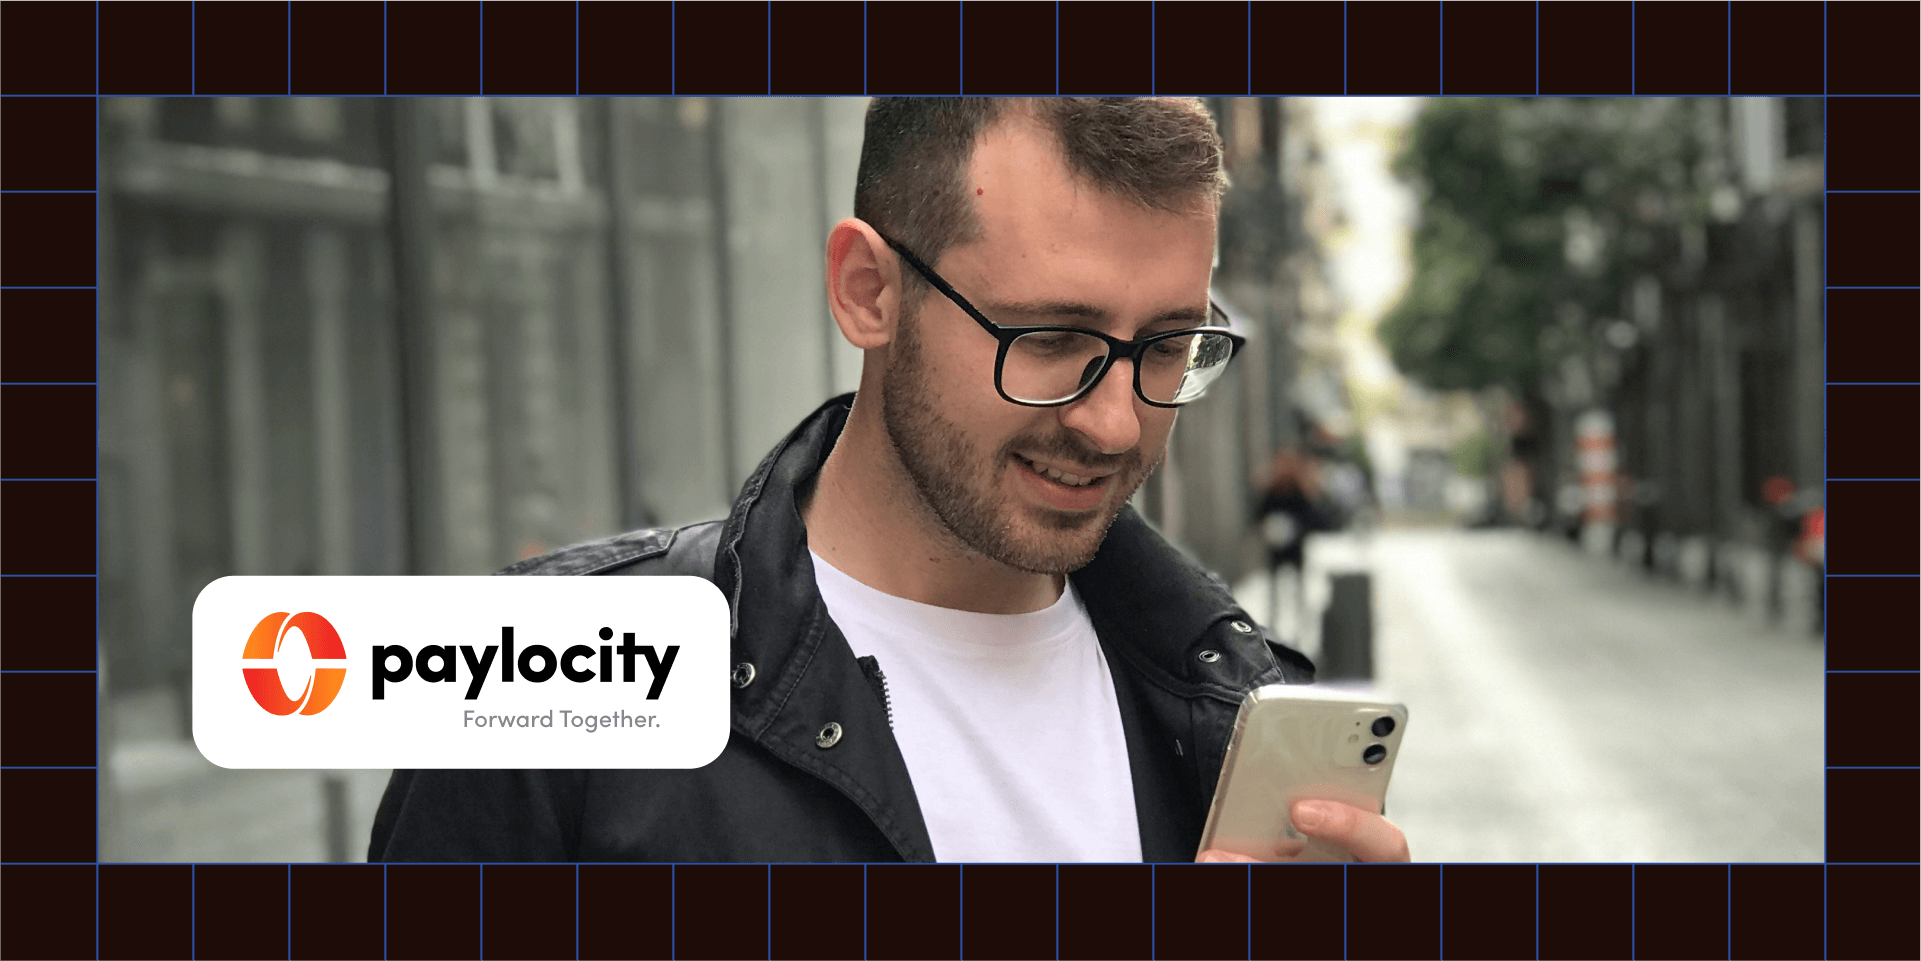 Paylocity transforms its go-to-market strategy with Fivetran